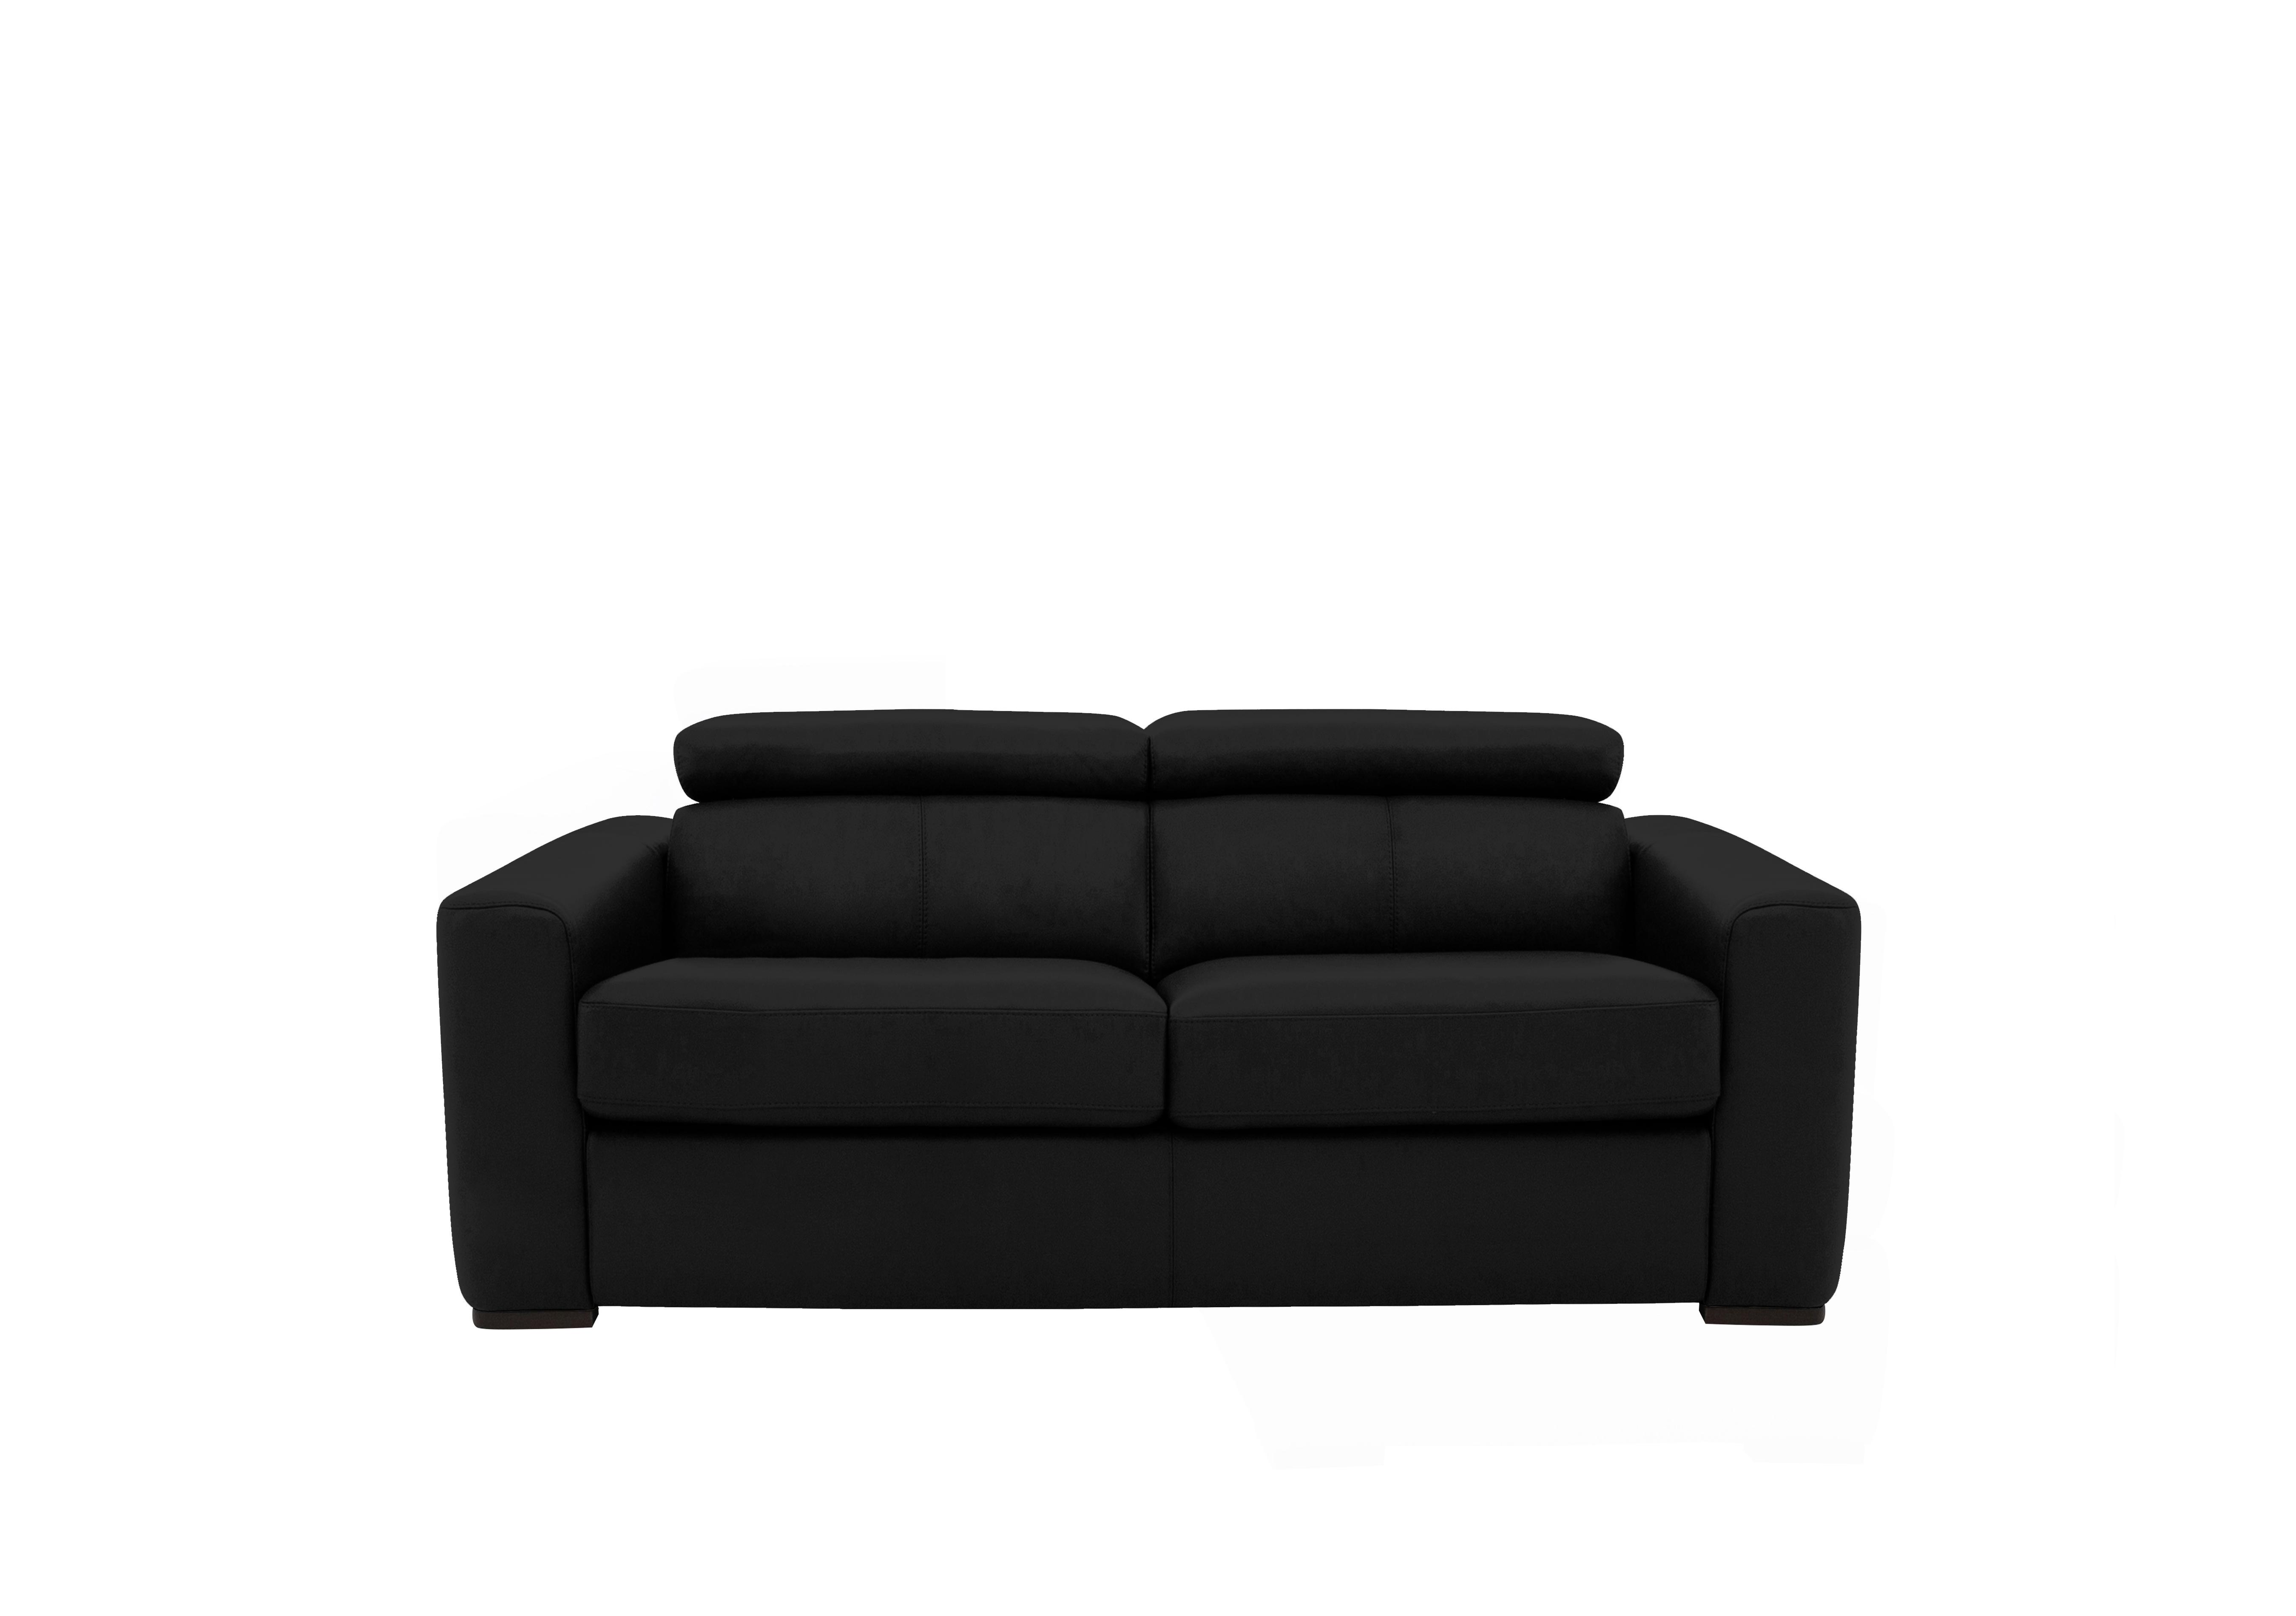 Infinity 2 Seater Leather Sofa in Bv-3500 Classic Black on Furniture Village